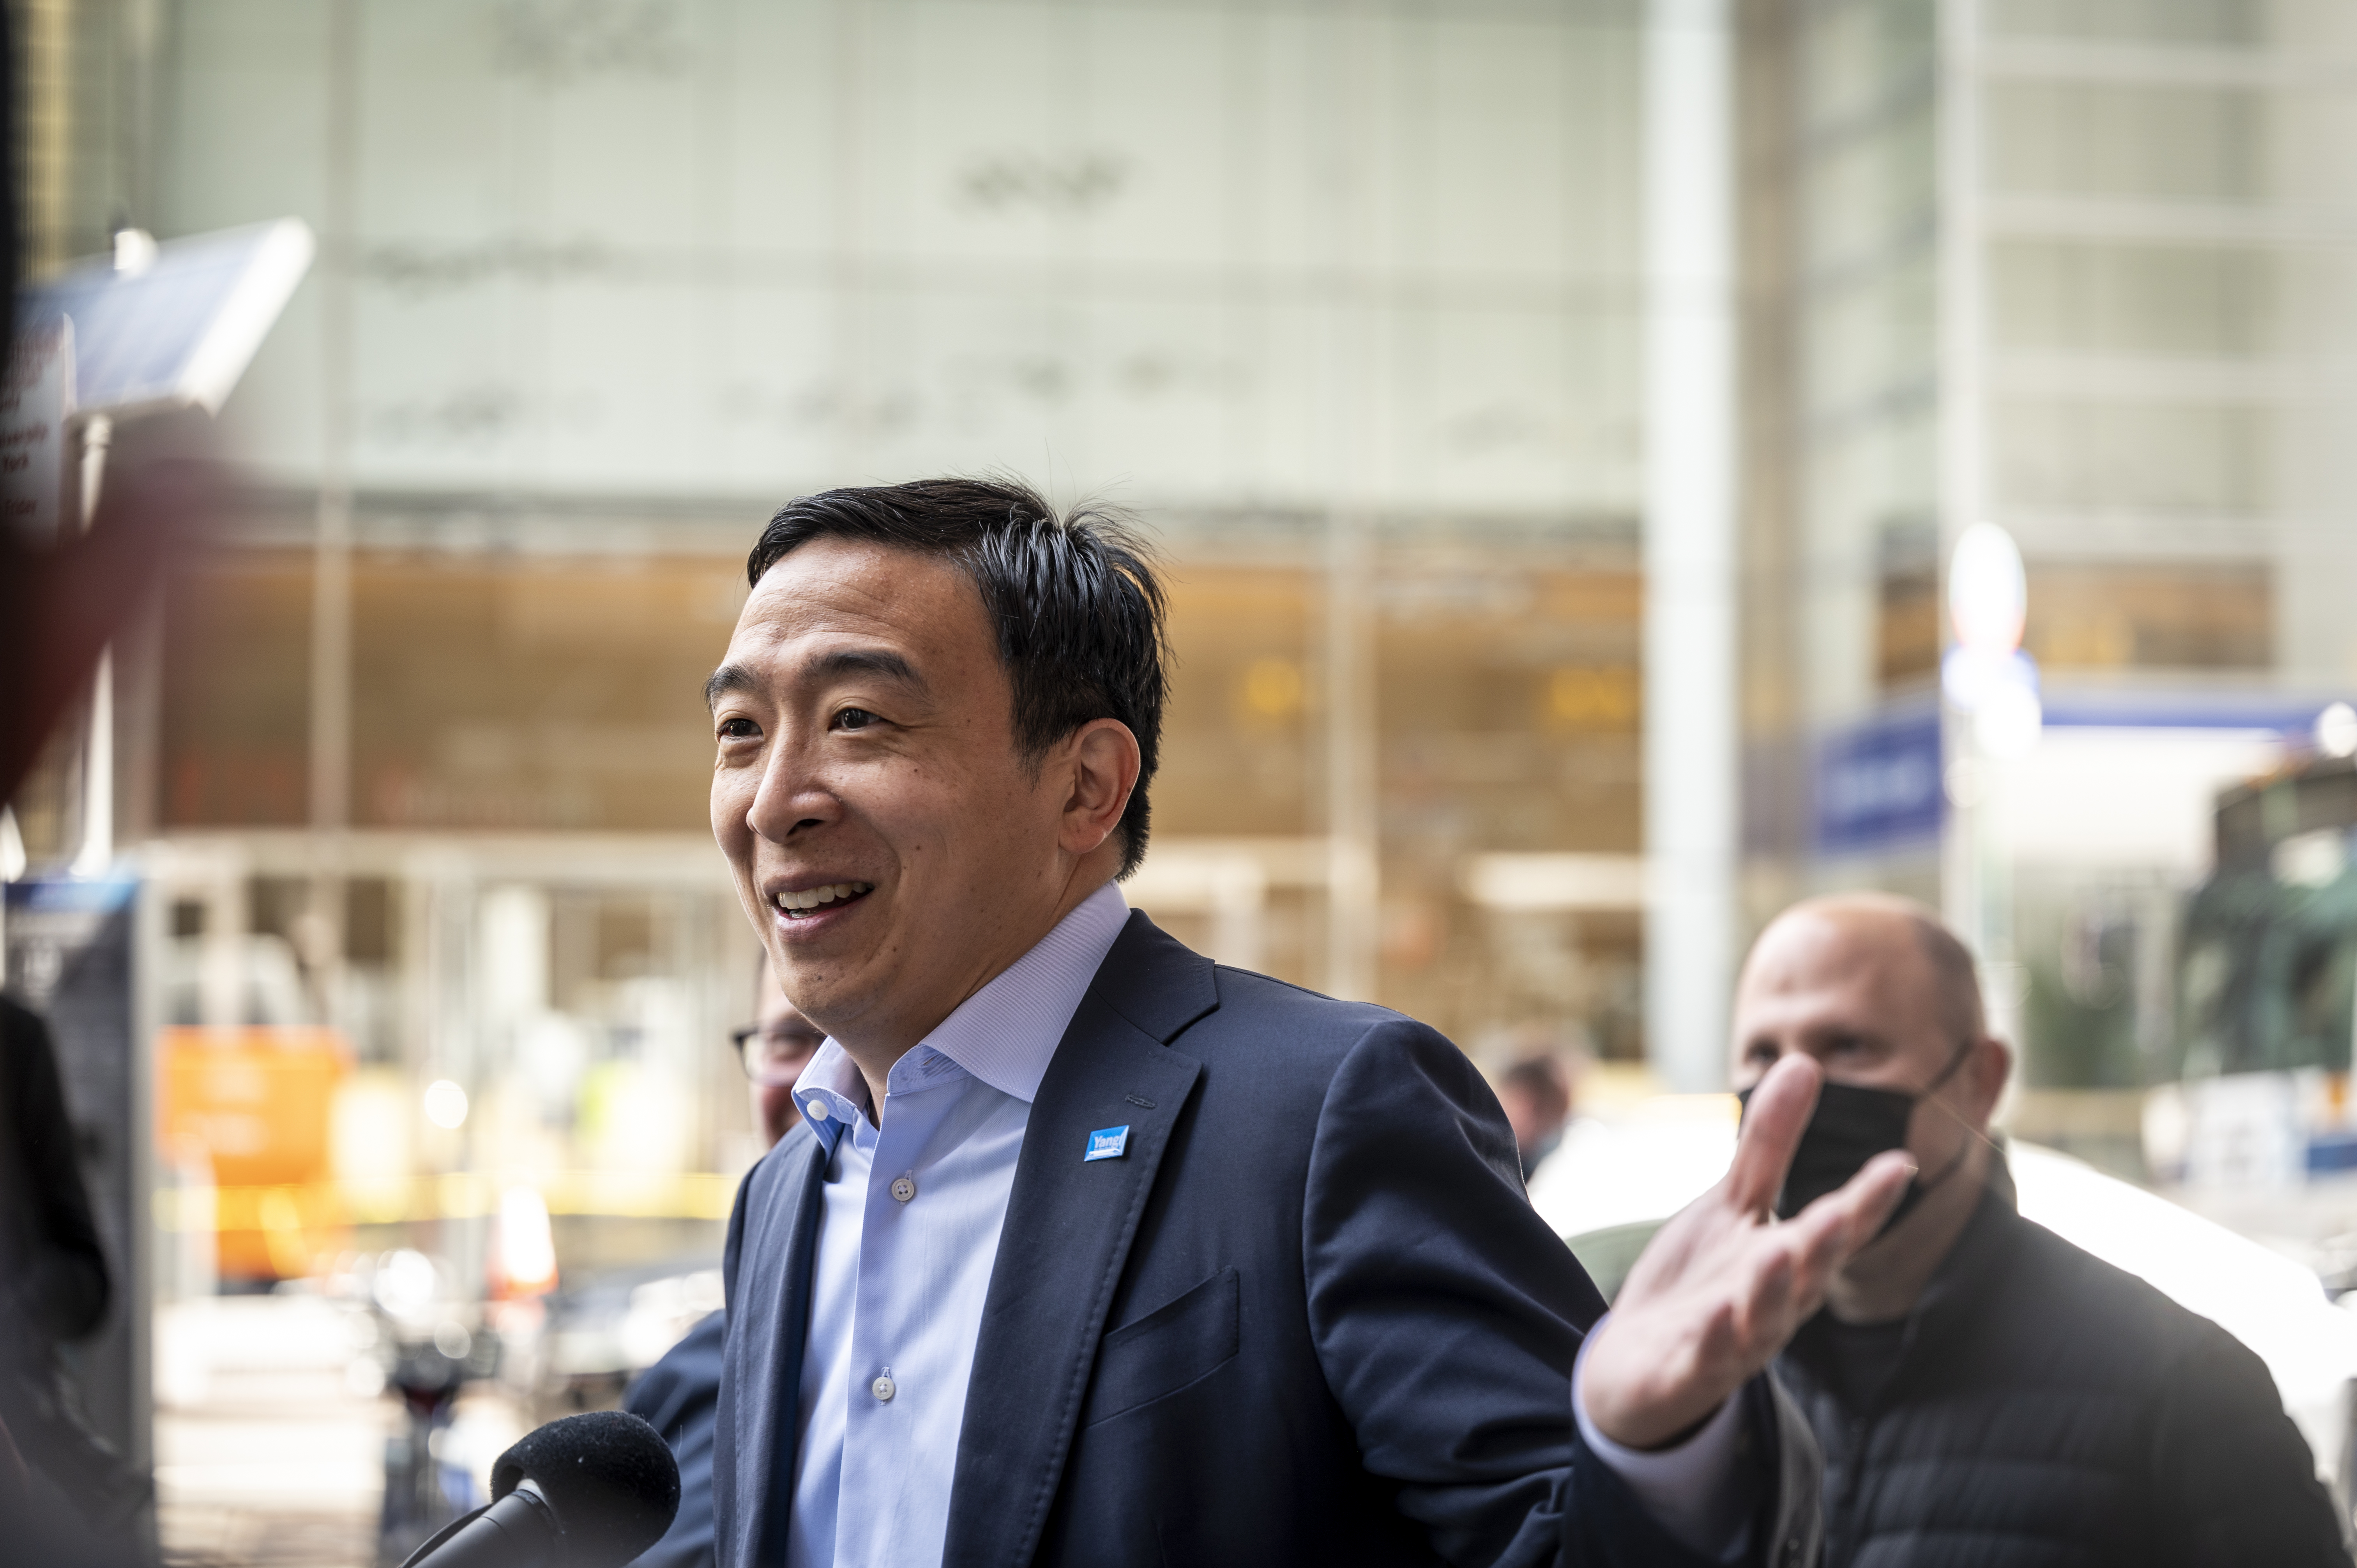 Mayoral hopeful Andrew Yang received an endorsement from Jonathan and Andrew Schnipper, owners of the Schnipper’s restaurant chain, outside of their 41st Street location, Friday, May 7, 2021.